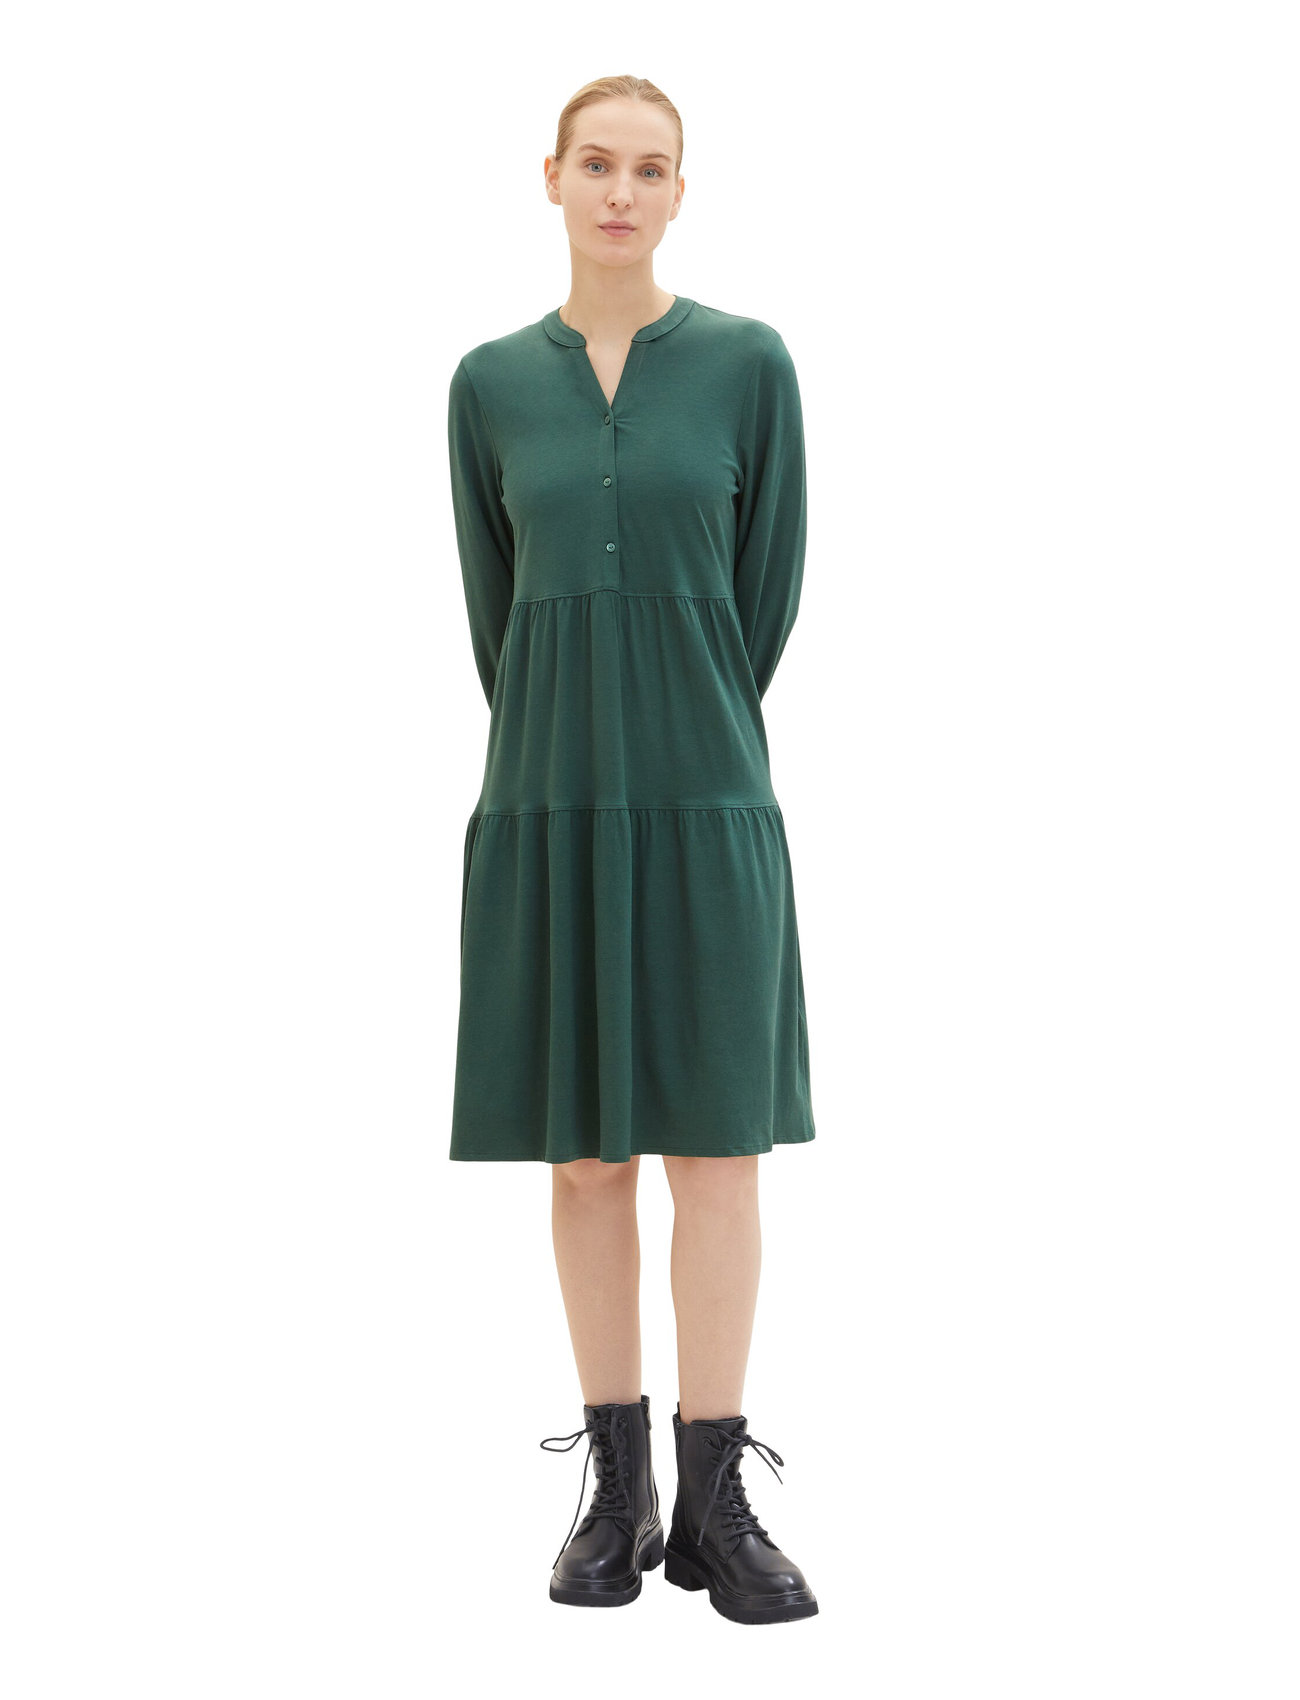 Tom Tailor - dress jersey with volants - pineneedle green - 1